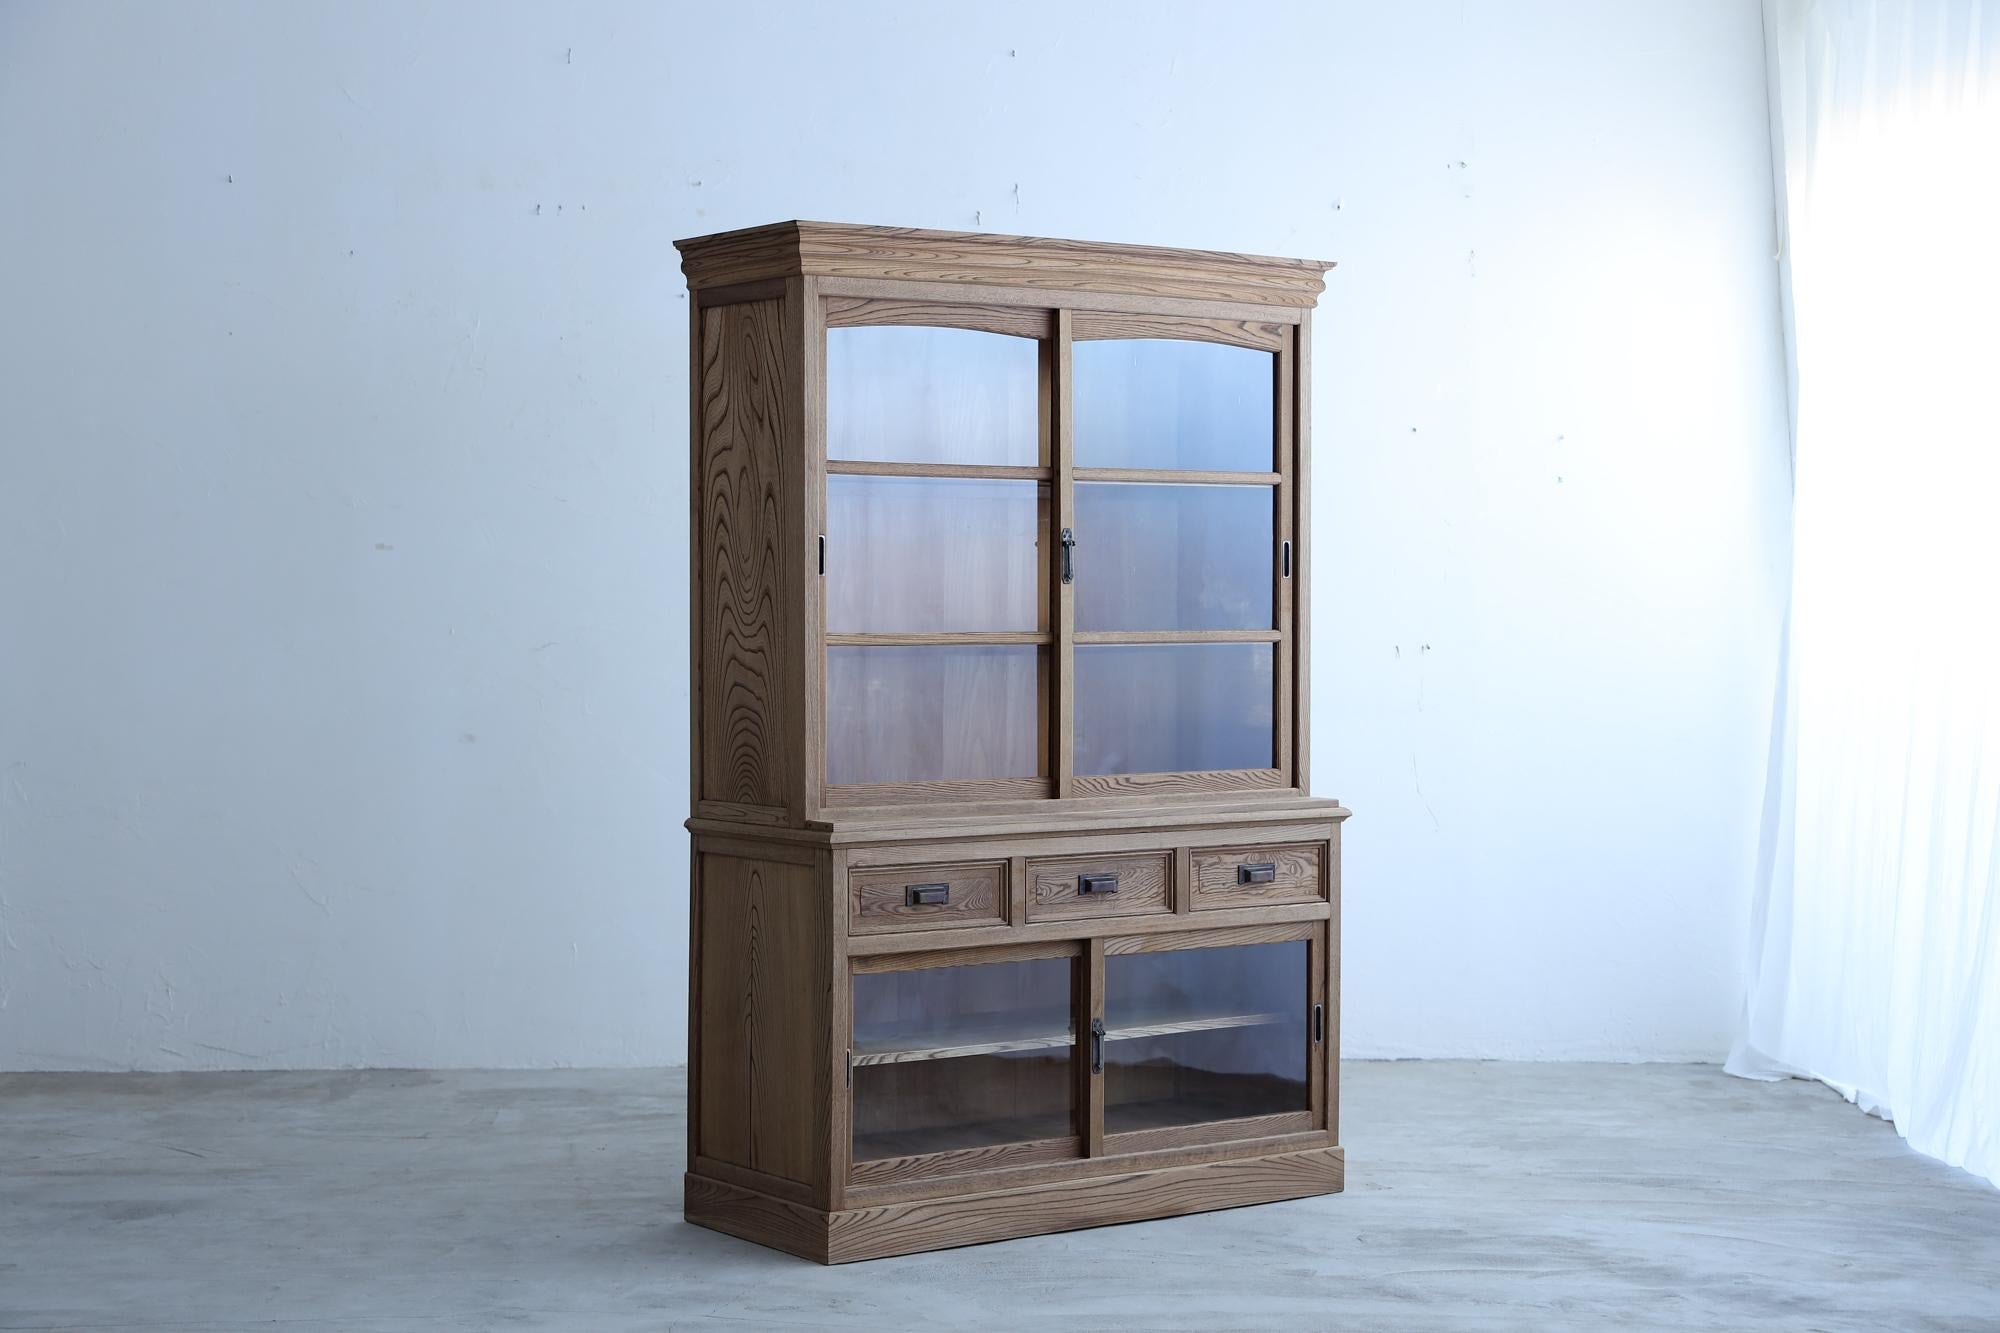 This Japanese antique cabinet was produced in the Taisho period (1912-1926).

This piece of furniture was made using the same traditional and advanced techniques used in the production of Japanese kamidana.

Our top-notch craftsmen have repaired the